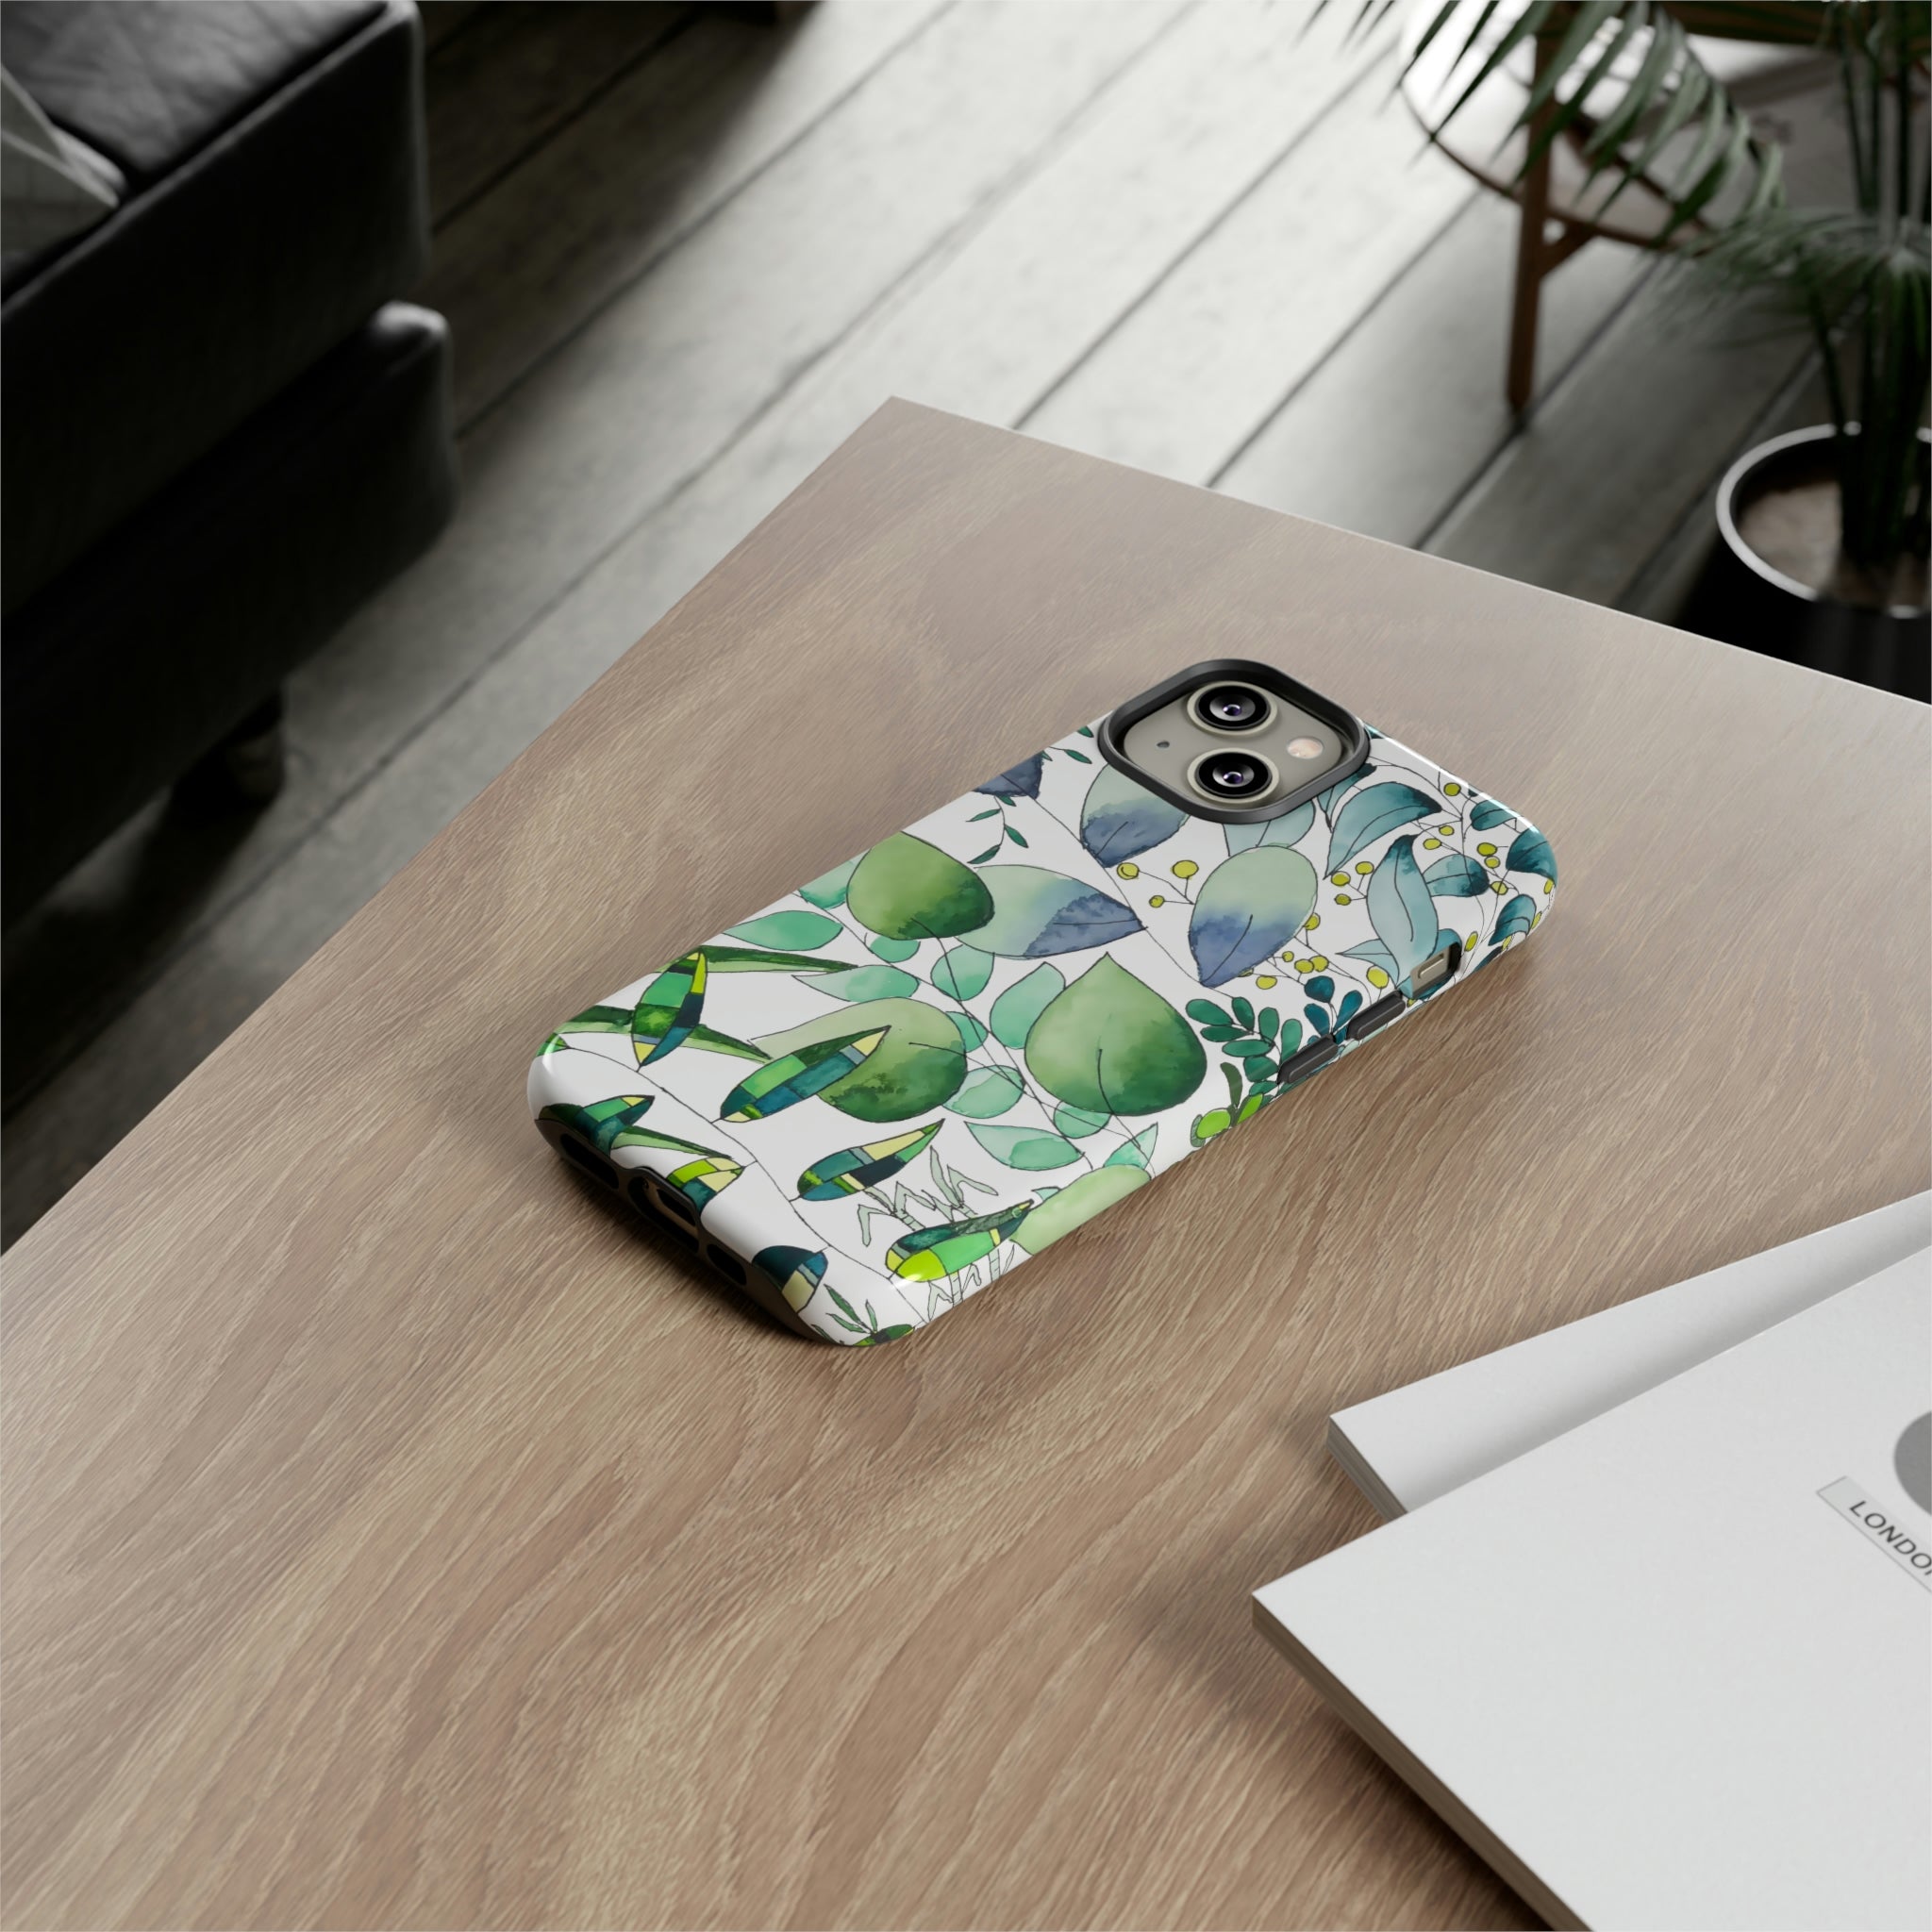 Aniplant Whimsy Botanical Print on Cell Phone Cases | Apple iPhone, Samsung Galaxy, Google Pixel